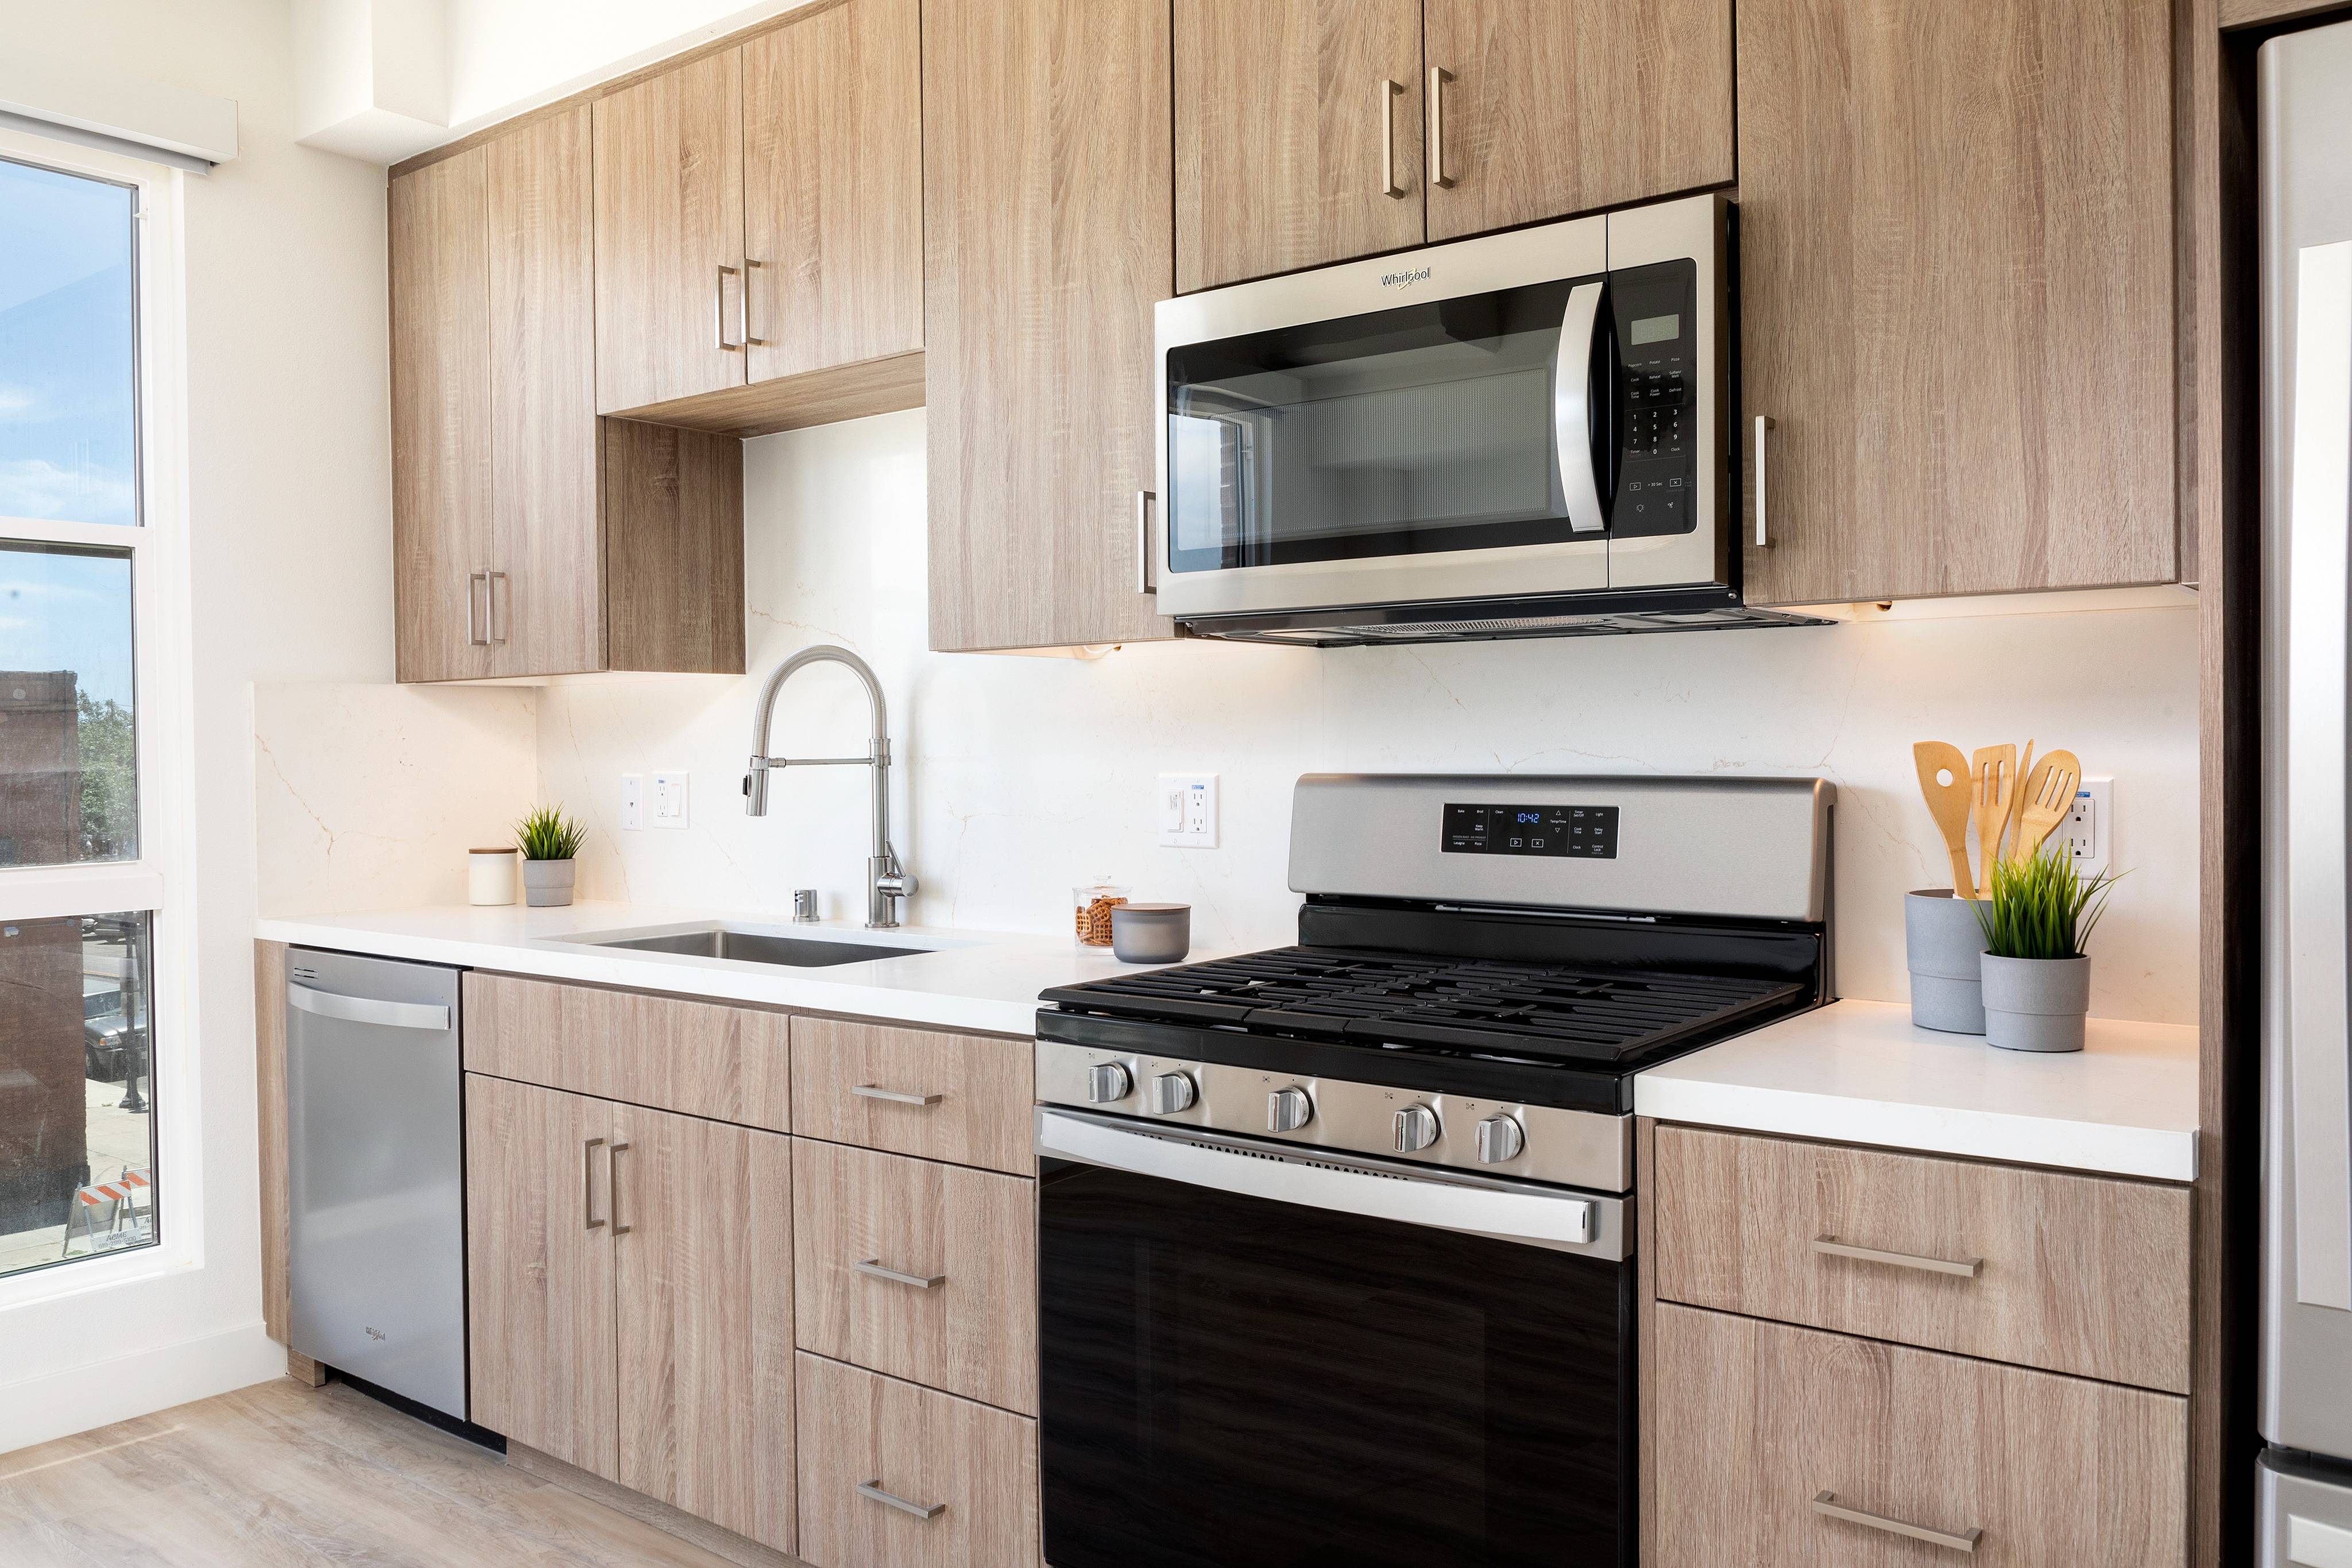 Loft layout and modern kitchen with custom cabinetry, gas ranges and sleek hardware at Modera San Diego